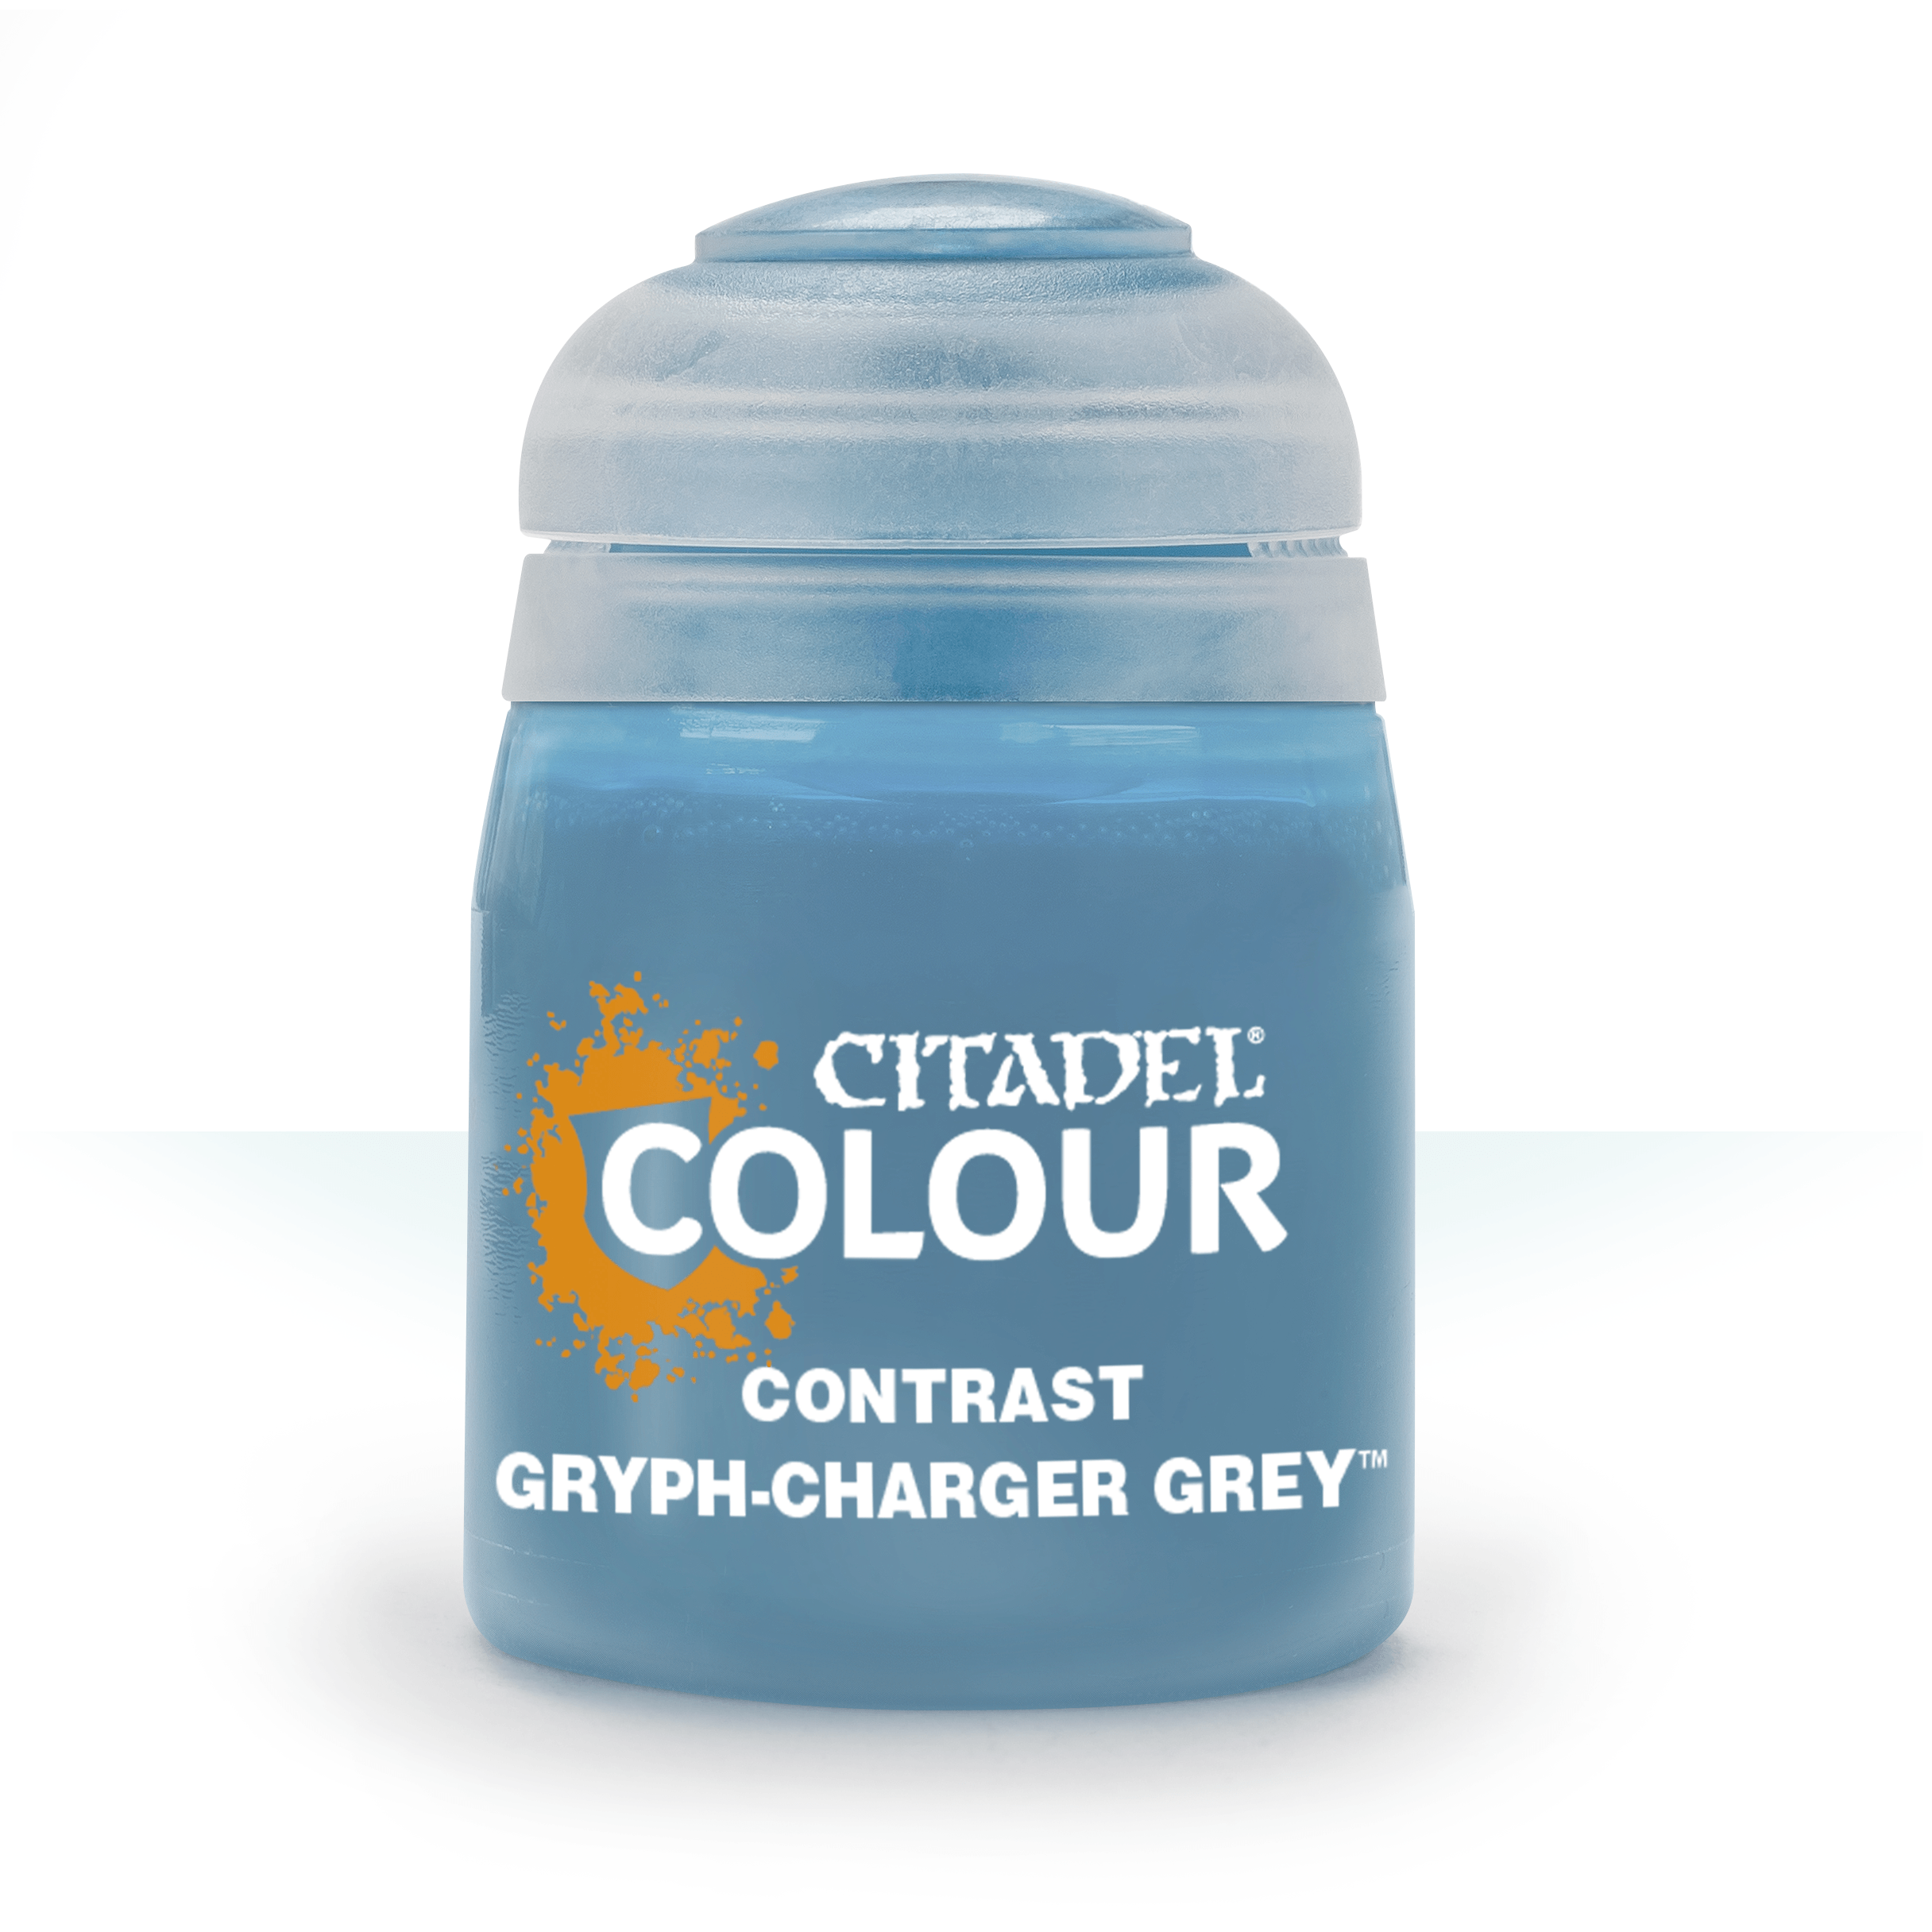 Gryph-Charger Grey - Citadel Contrast Colour